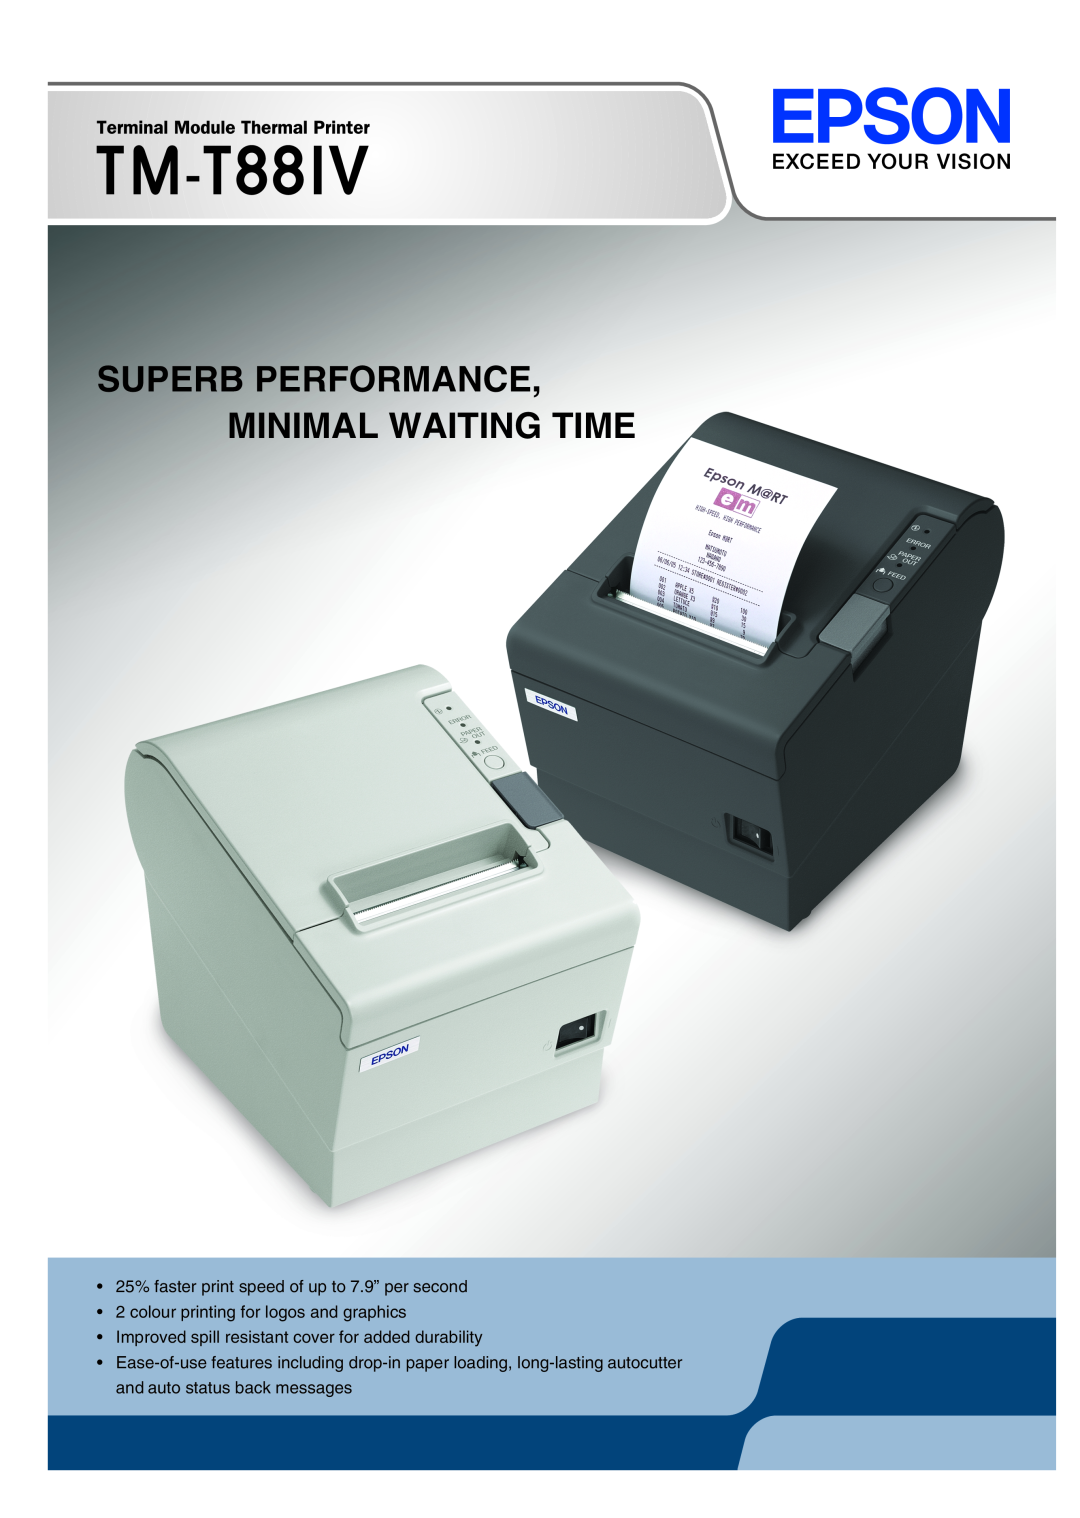 Epson TM-T88IV manual Superb Performance, Minimal Waiting Time, 25% faster print speed of up to 7.9” per second 